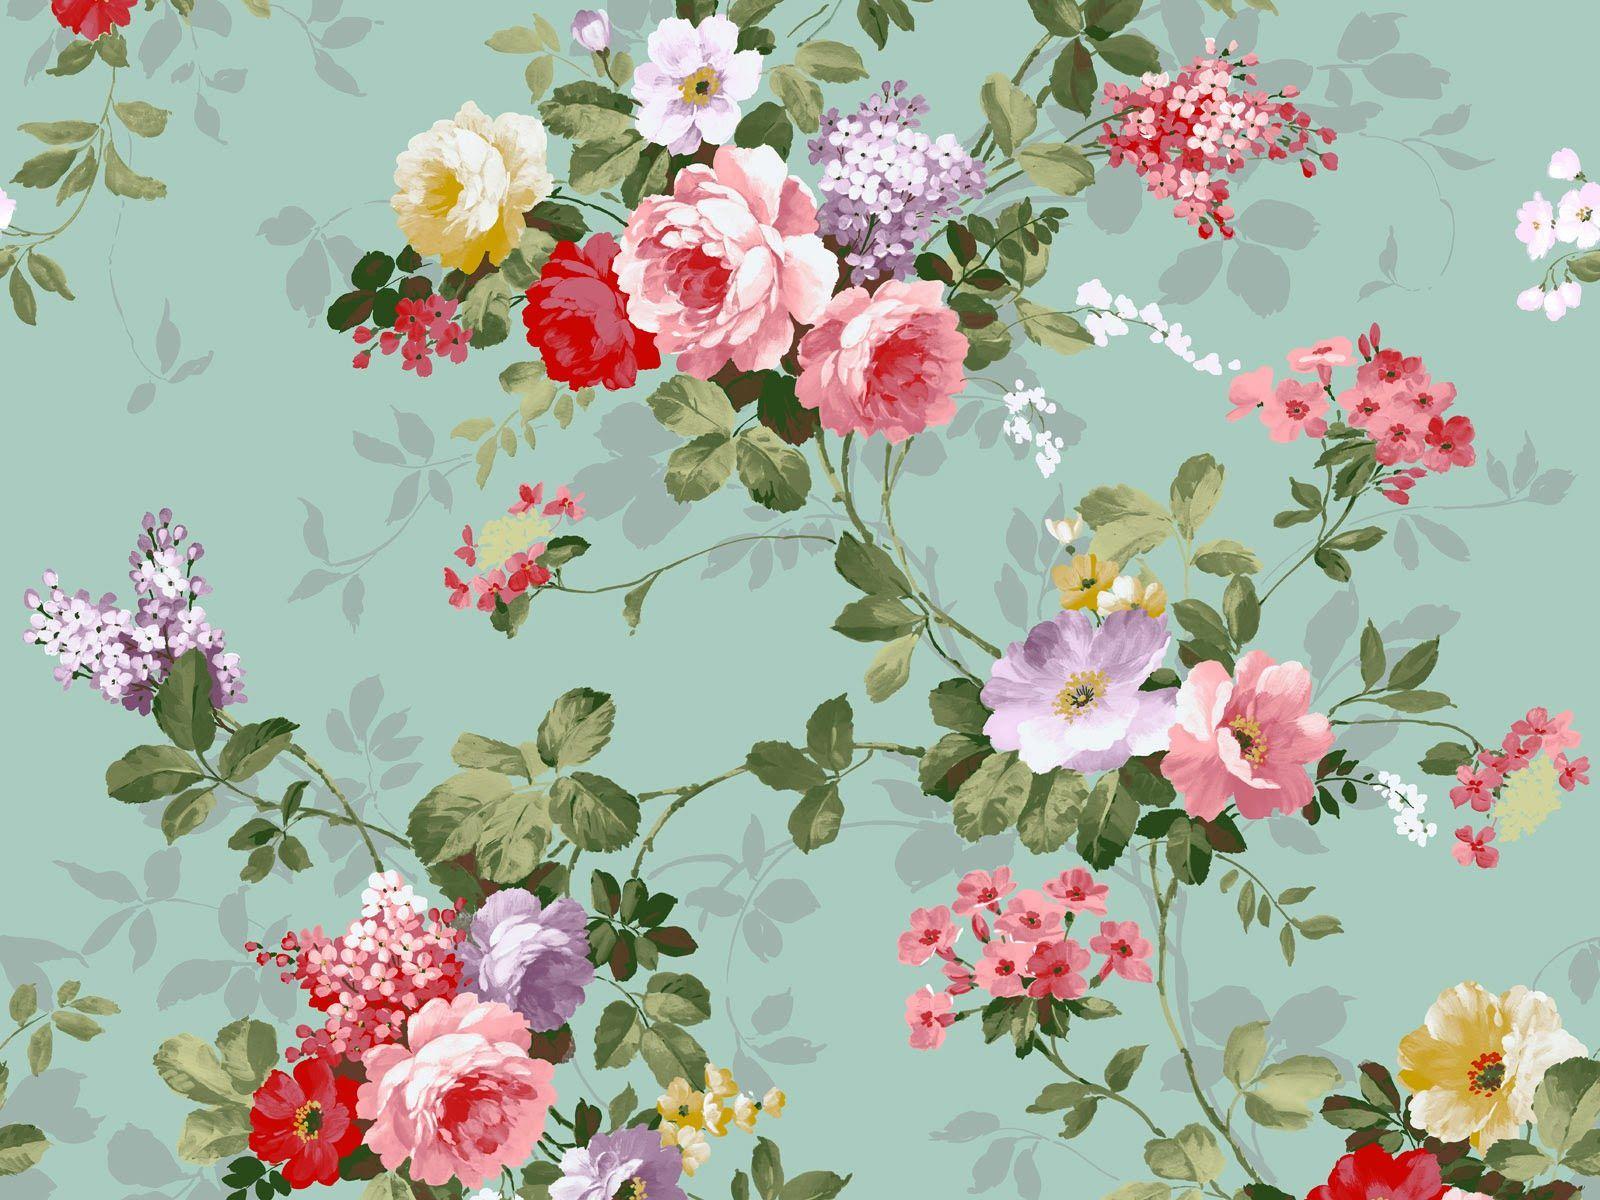 This is one of cath Kidstons more known prints, with